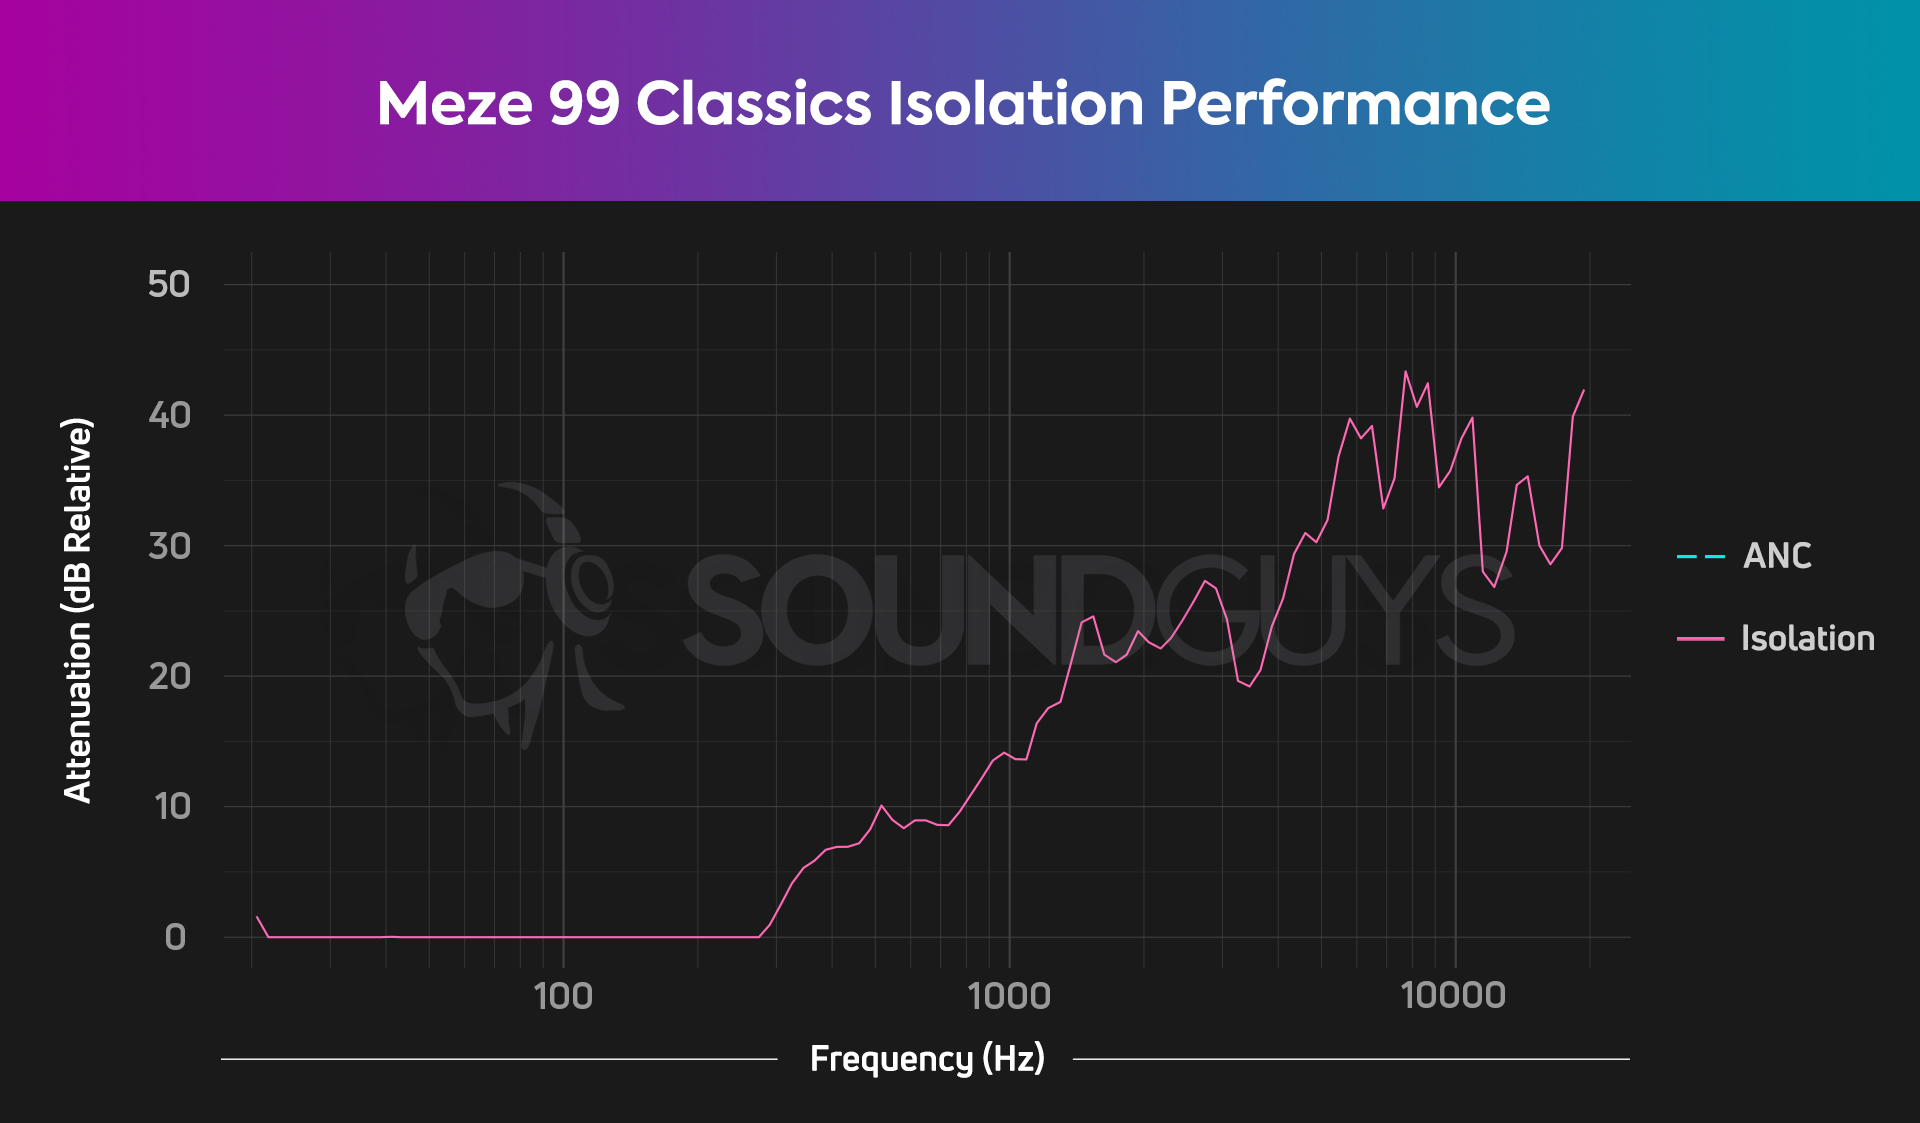 The Meze 99 Classics reduces noise above 300Hz by half to one-eighth its original intensity.